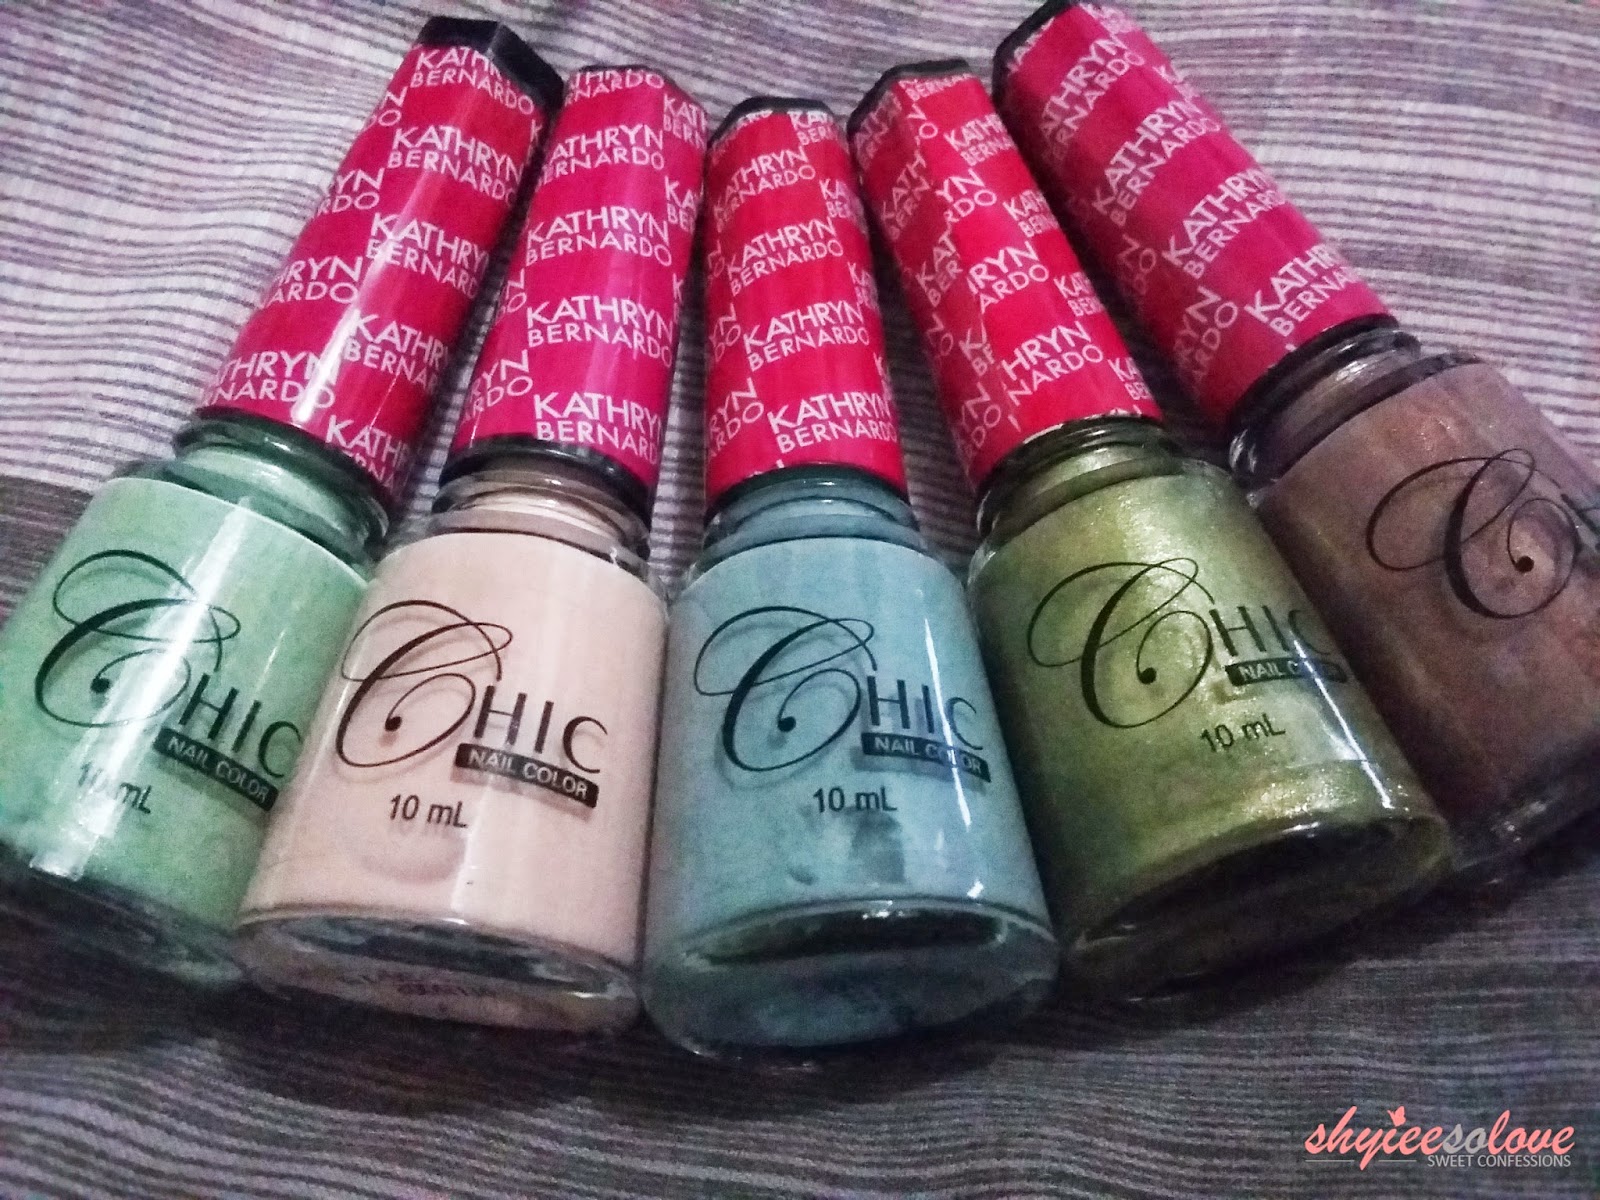 "Chic Nail Polish"
3. "Timeless Nude" - wide 5